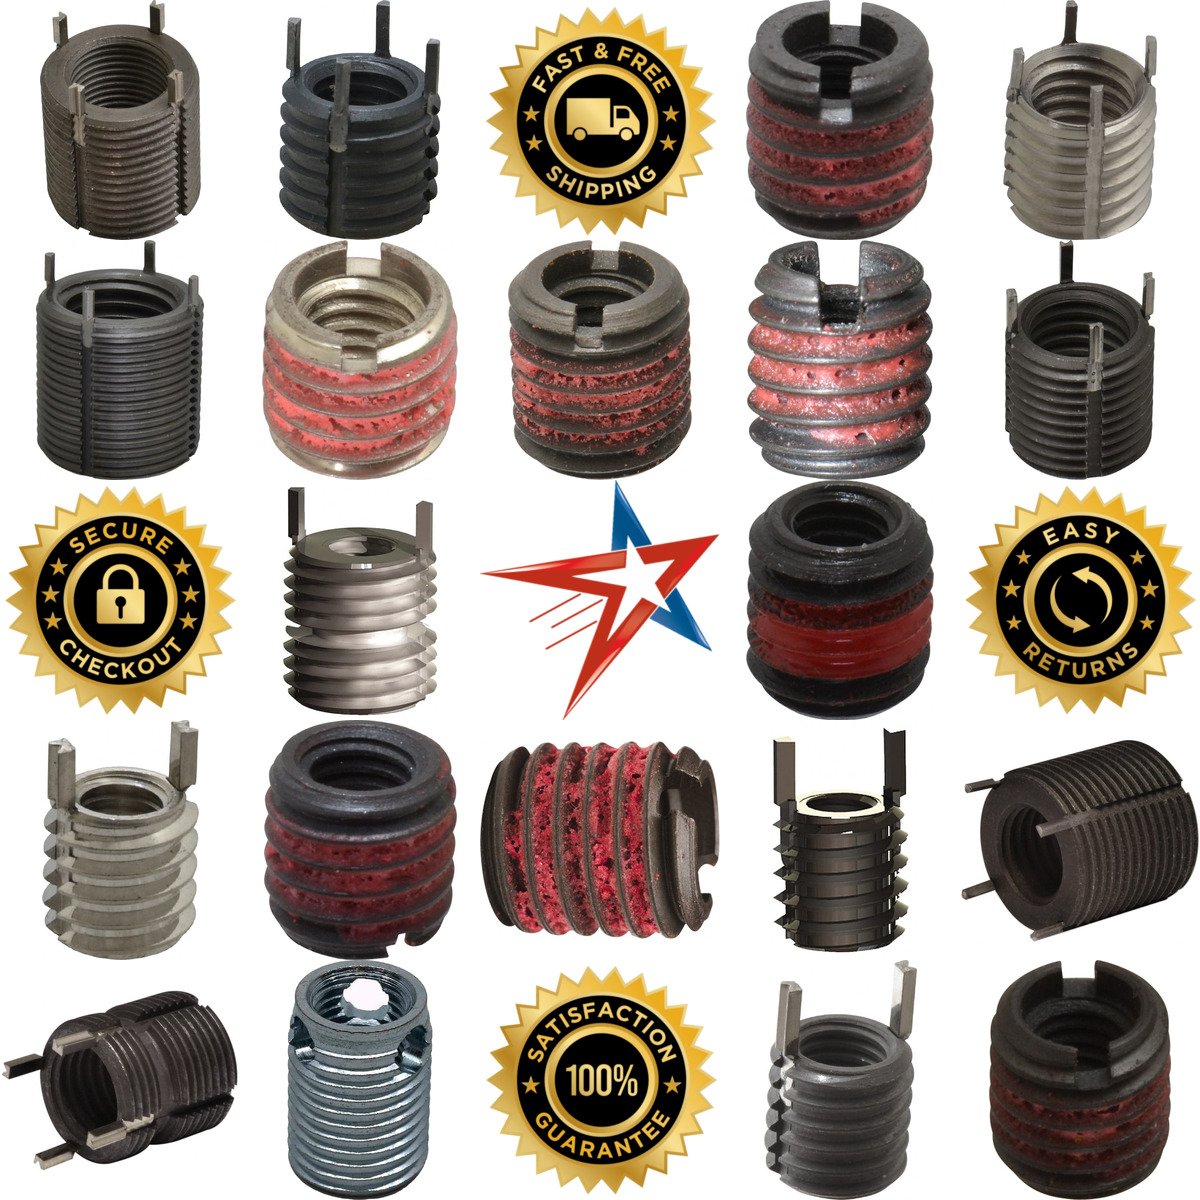 A selection of Thread Locking Inserts products on GoVets